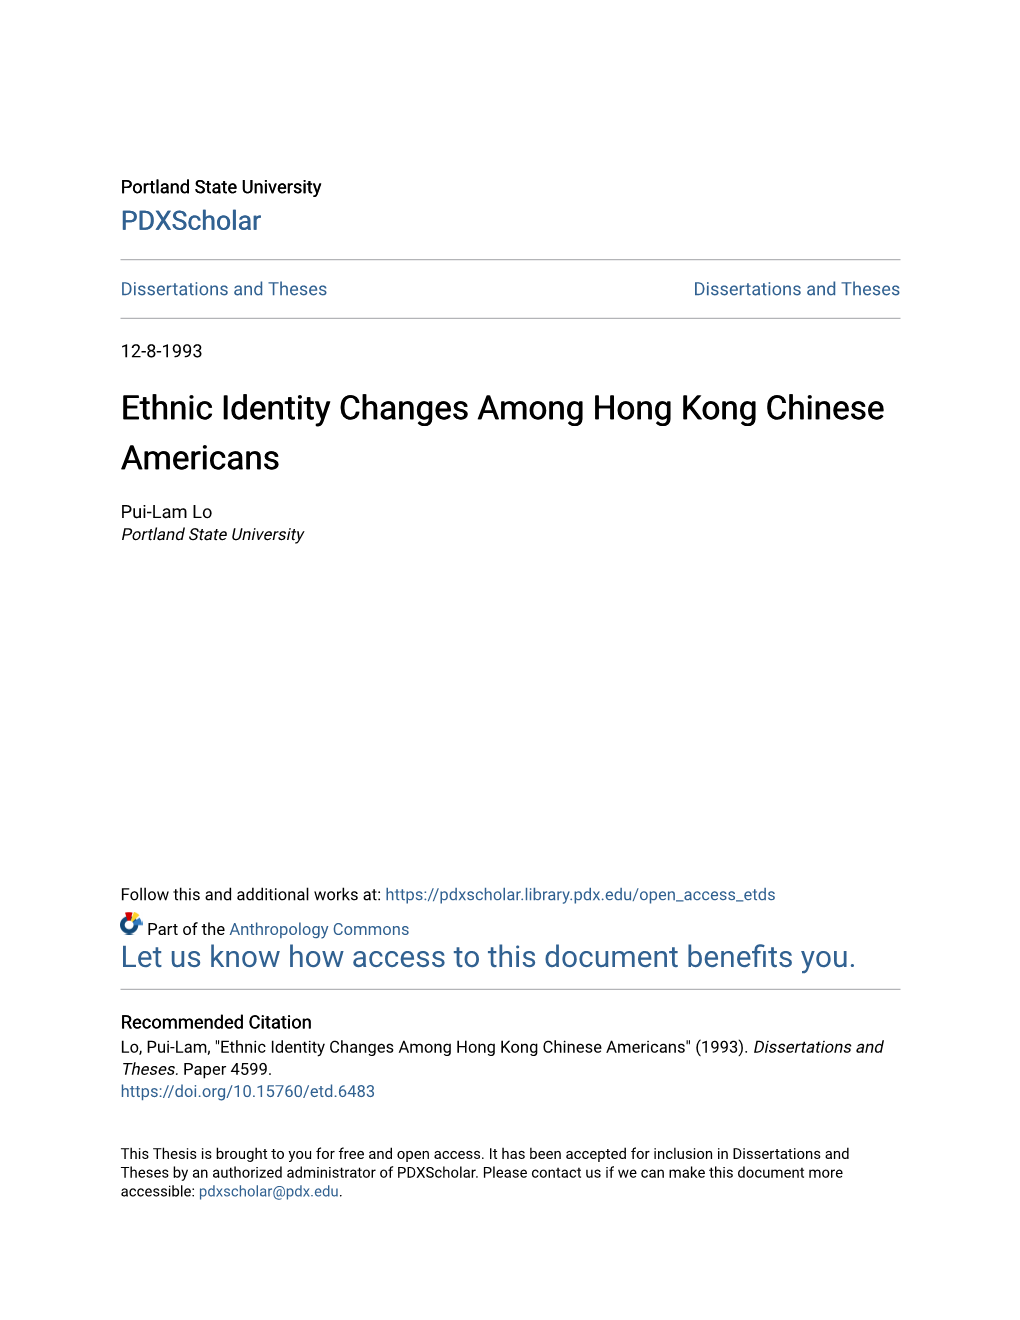 Ethnic Identity Changes Among Hong Kong Chinese Americans